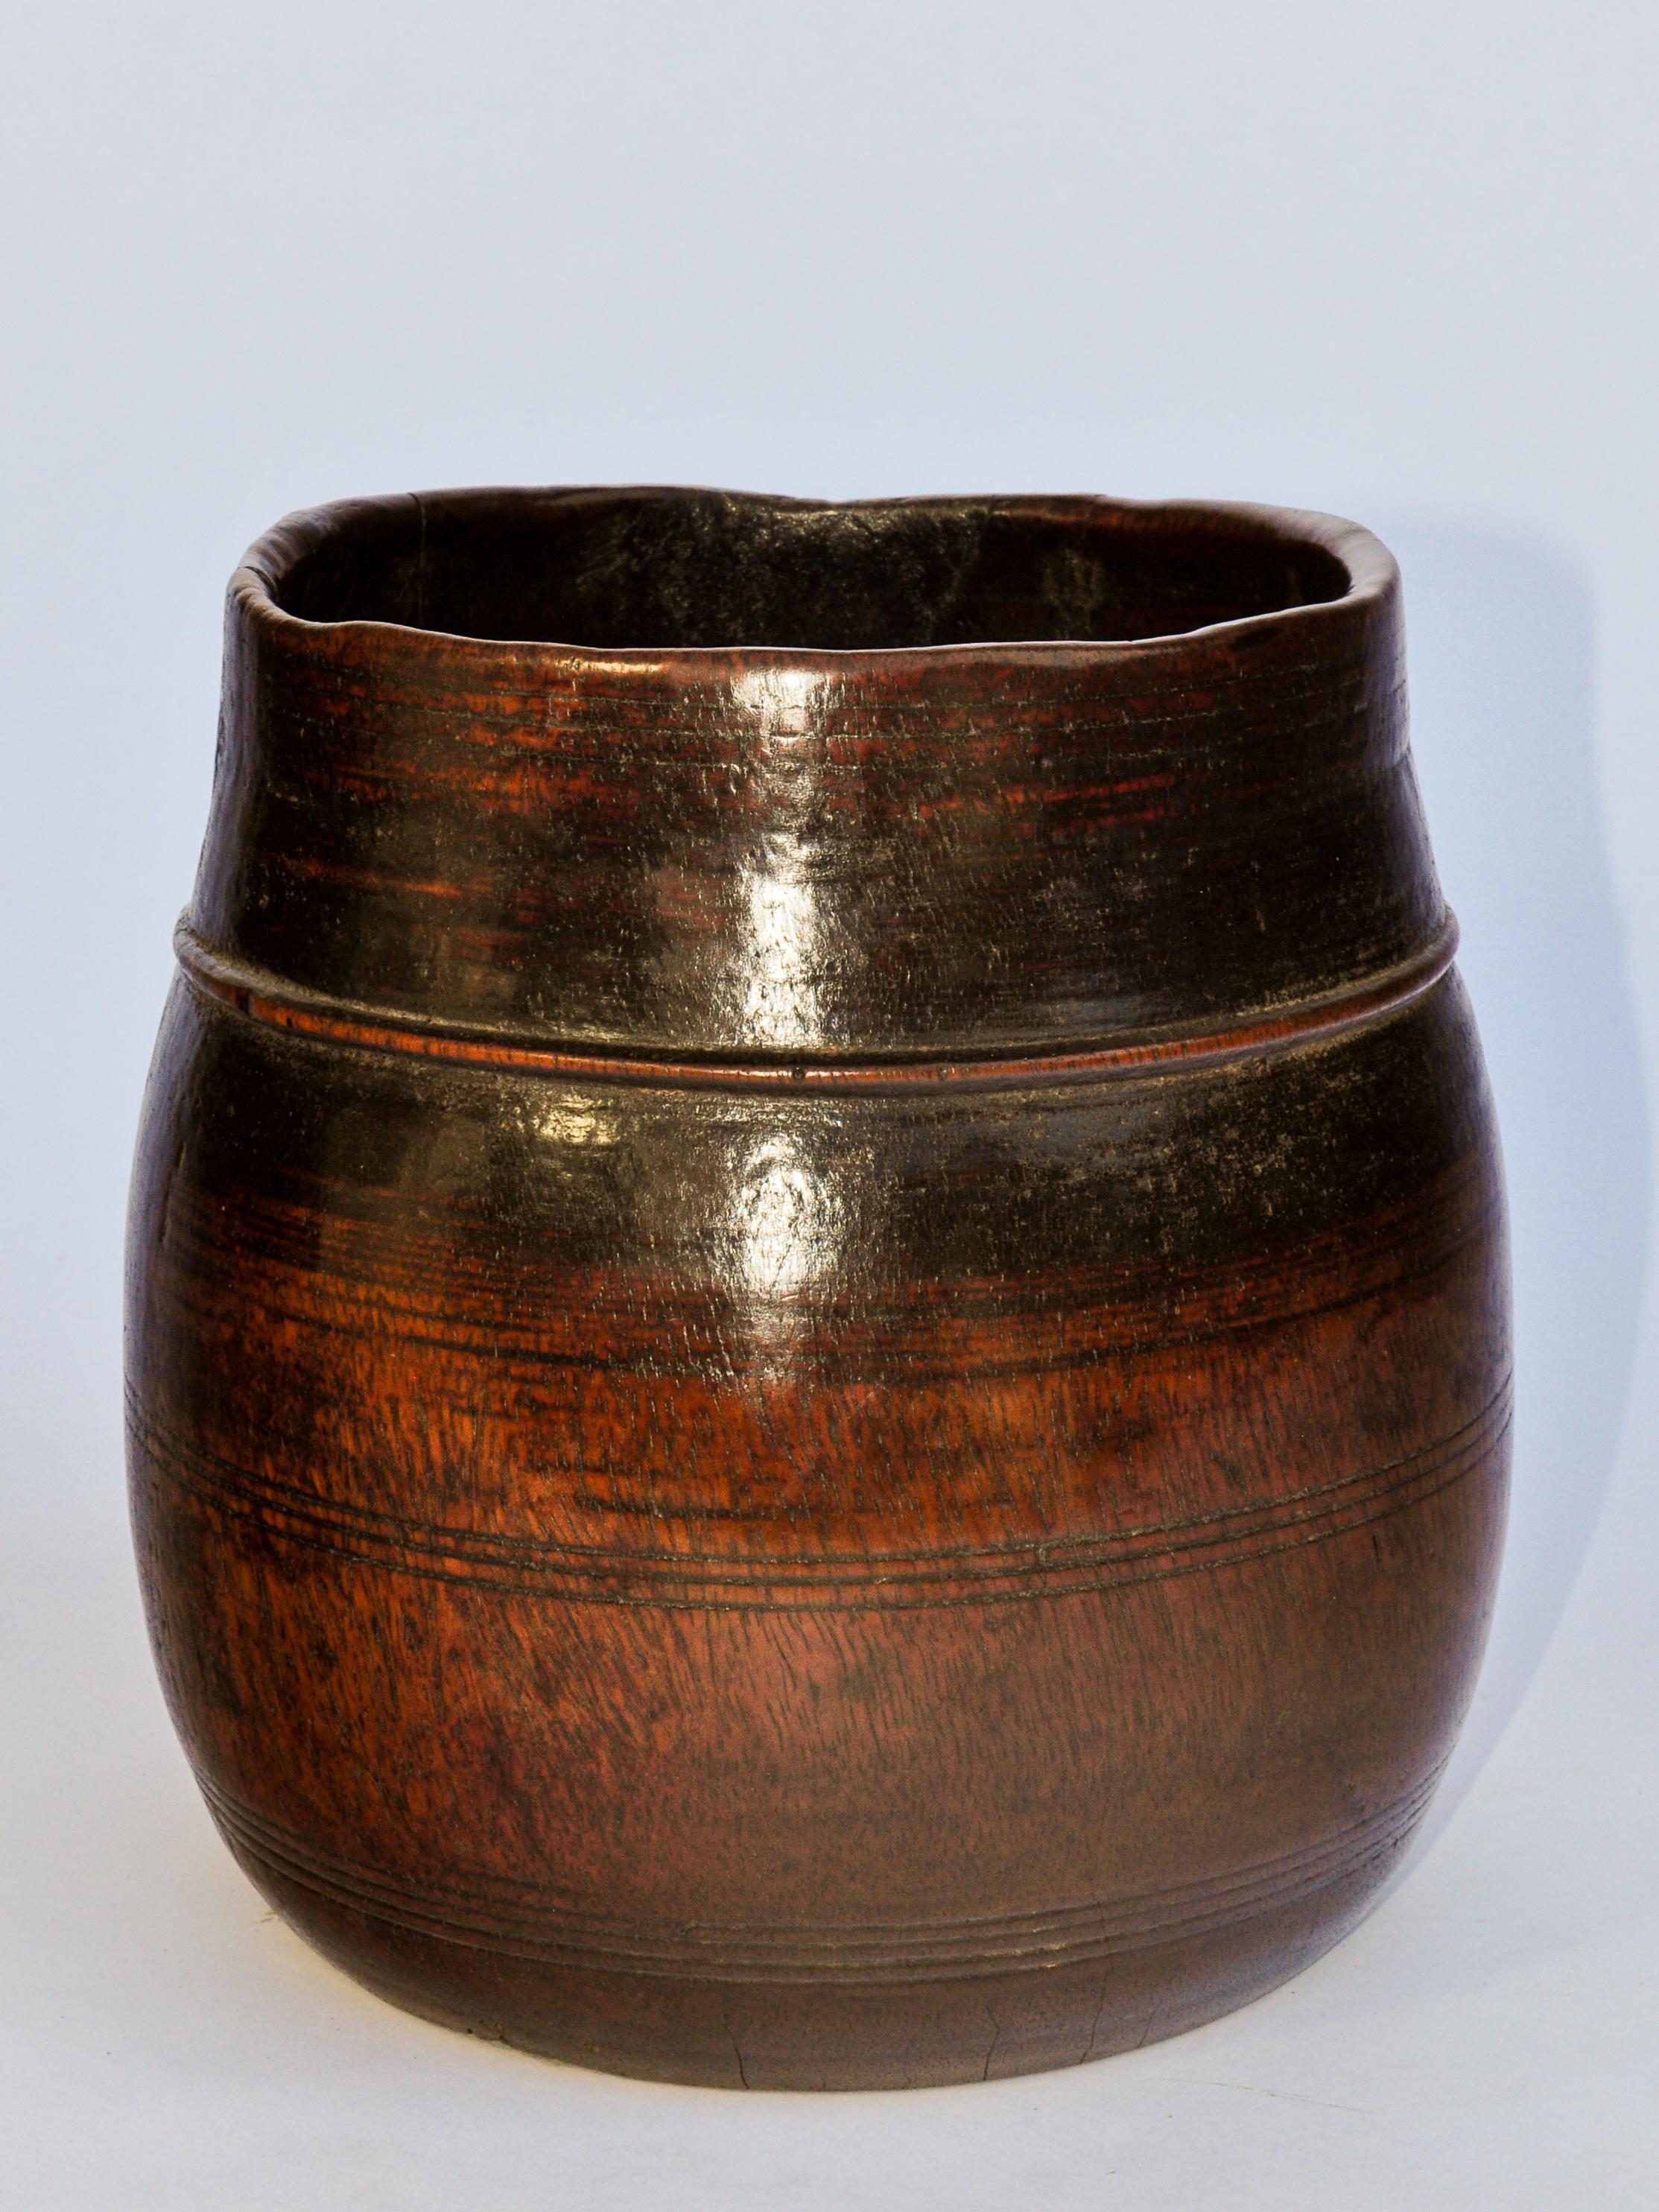 Vintage wooden grain measure pot from the Mountains of Nepal. Mid-20th century.
This handcrafted wooden pot is called a Pathi, the Nepali term denoting a standard unit of measure for grains and lentils. It comes from rural Nepal, and would have